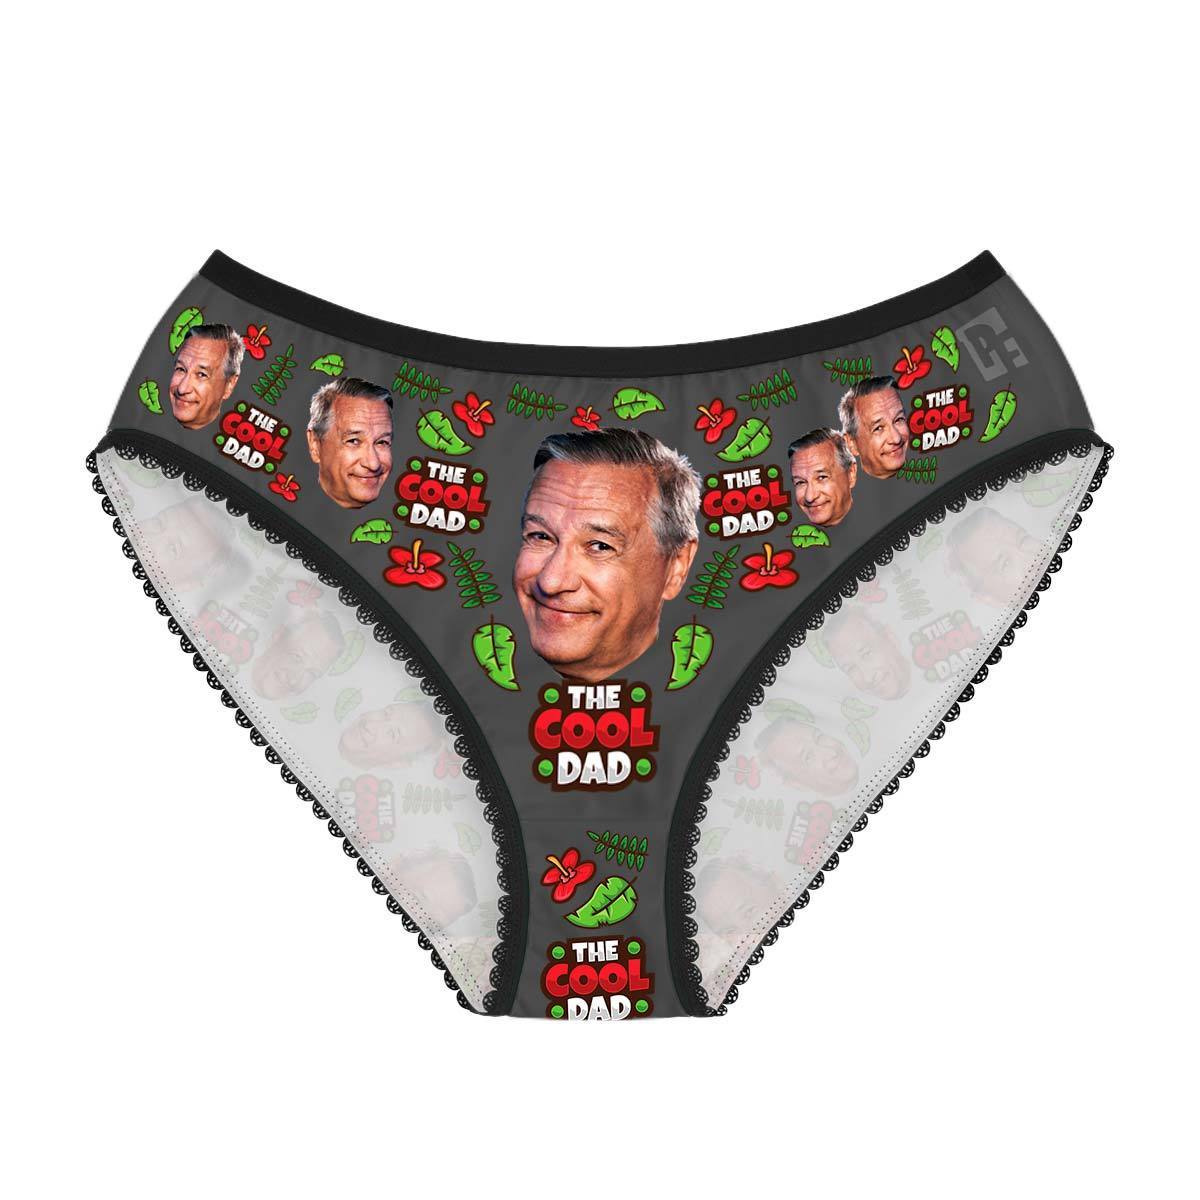 Dark The cool dad women's underwear briefs personalized with photo printed on them